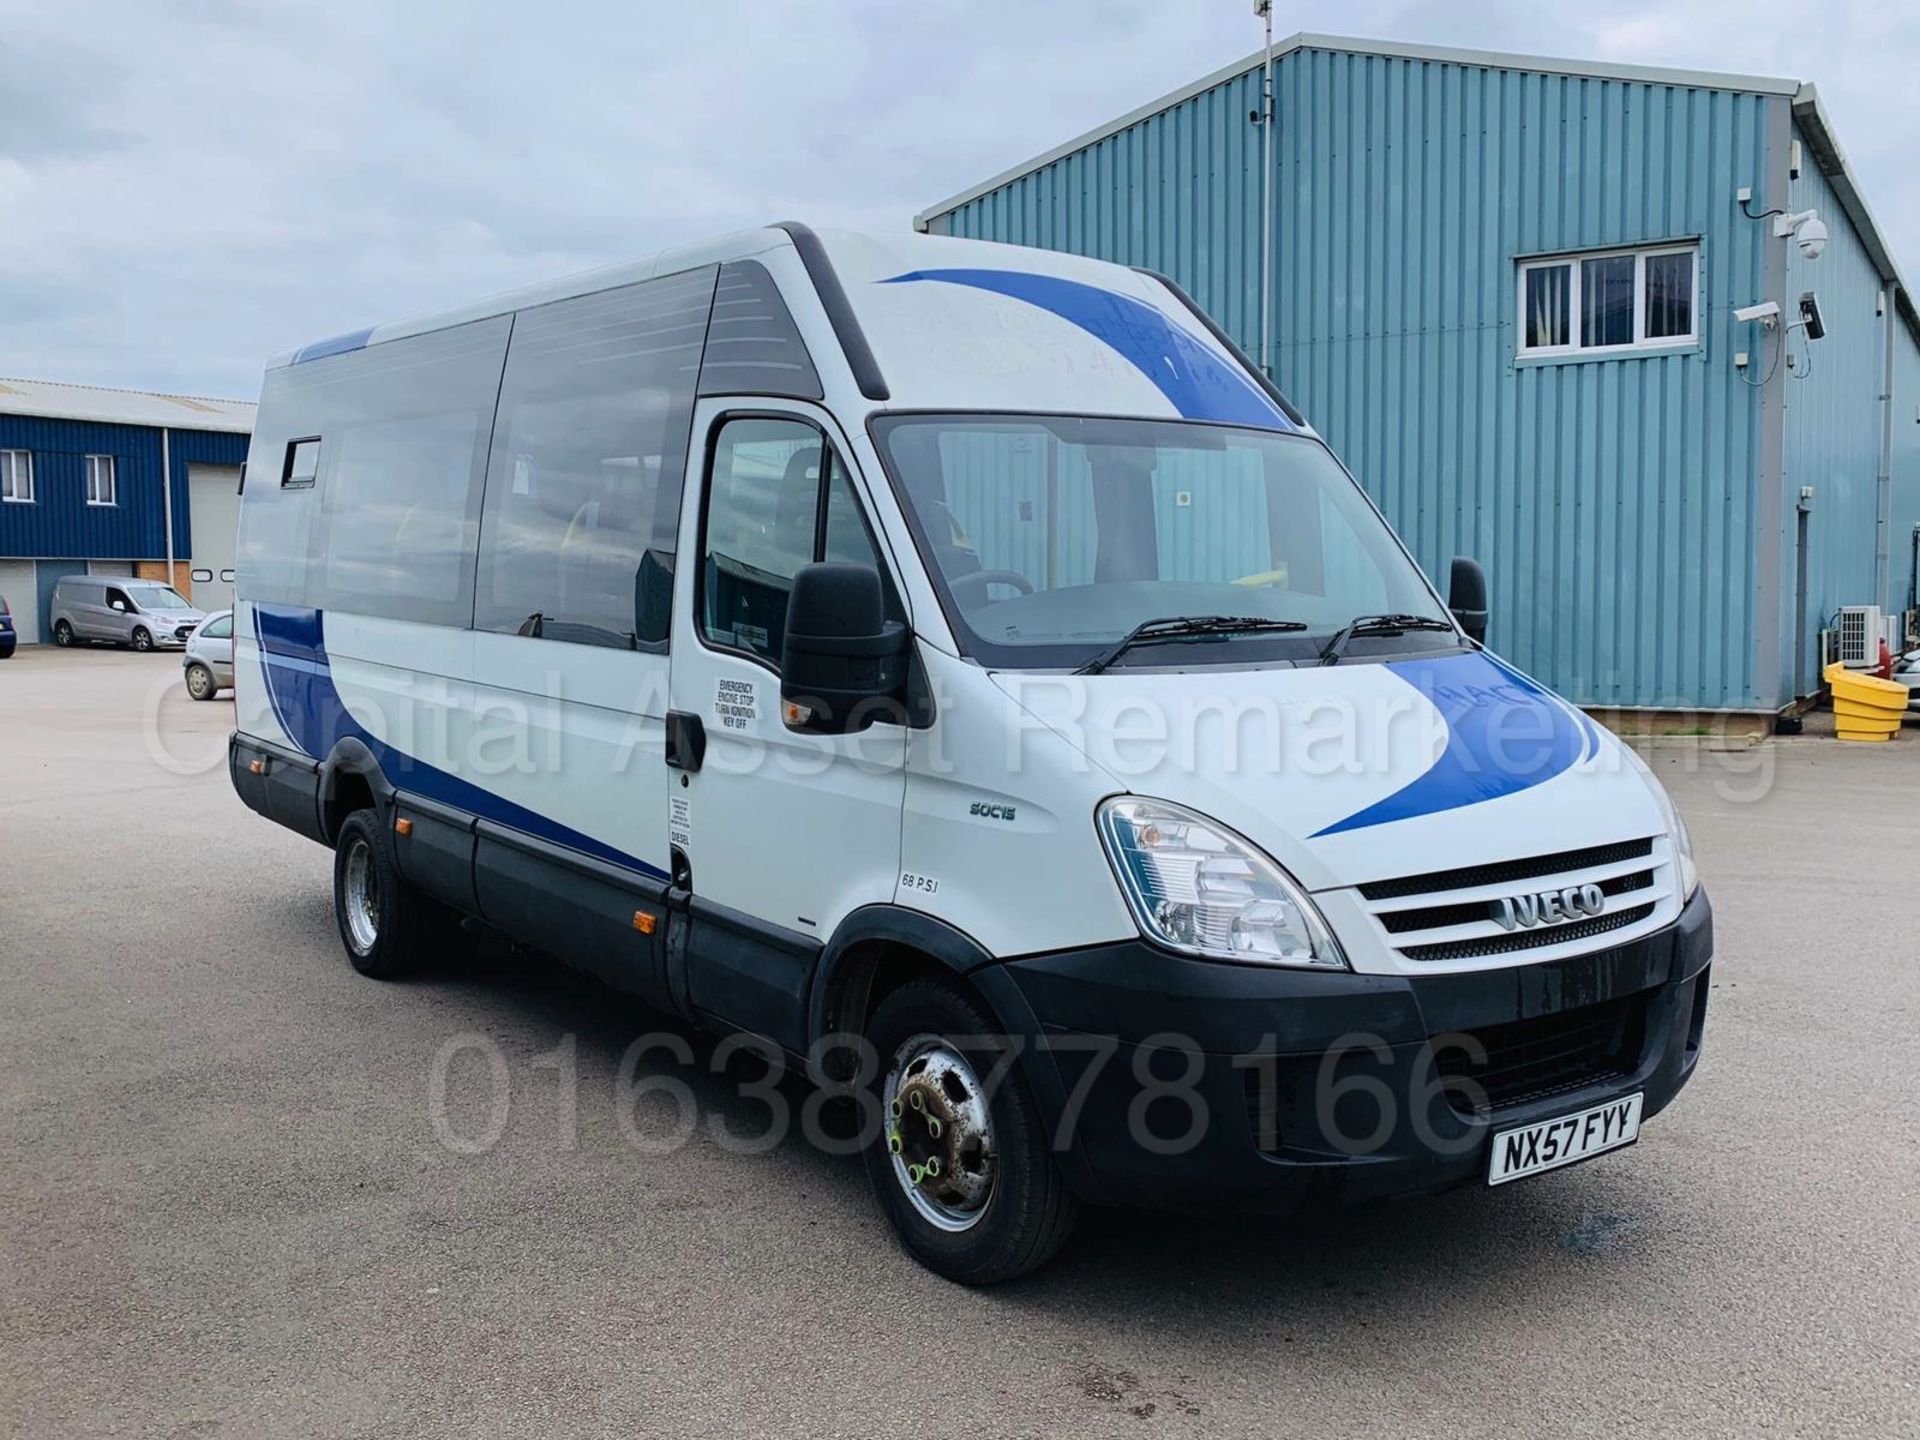 (On Sale) IVECO DAILY *LWB - 16 SEATER MINI-BUS / COACH* (57 REG) '3.0 DIESEL' *WHEEL CHAIR RAMP* - Image 10 of 29